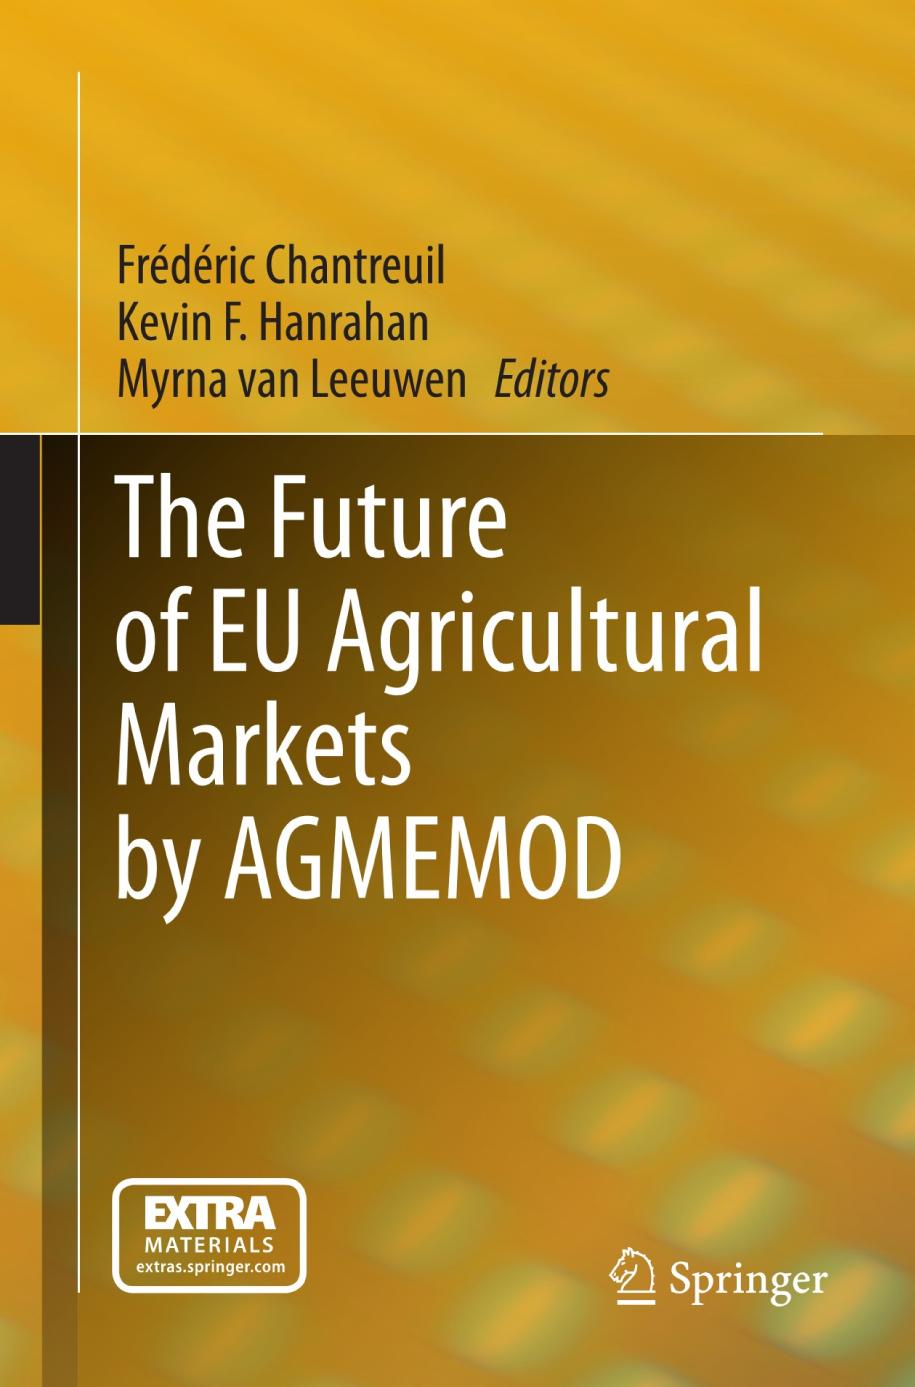 The Future of Eu Agricultural Markets by Agmemod